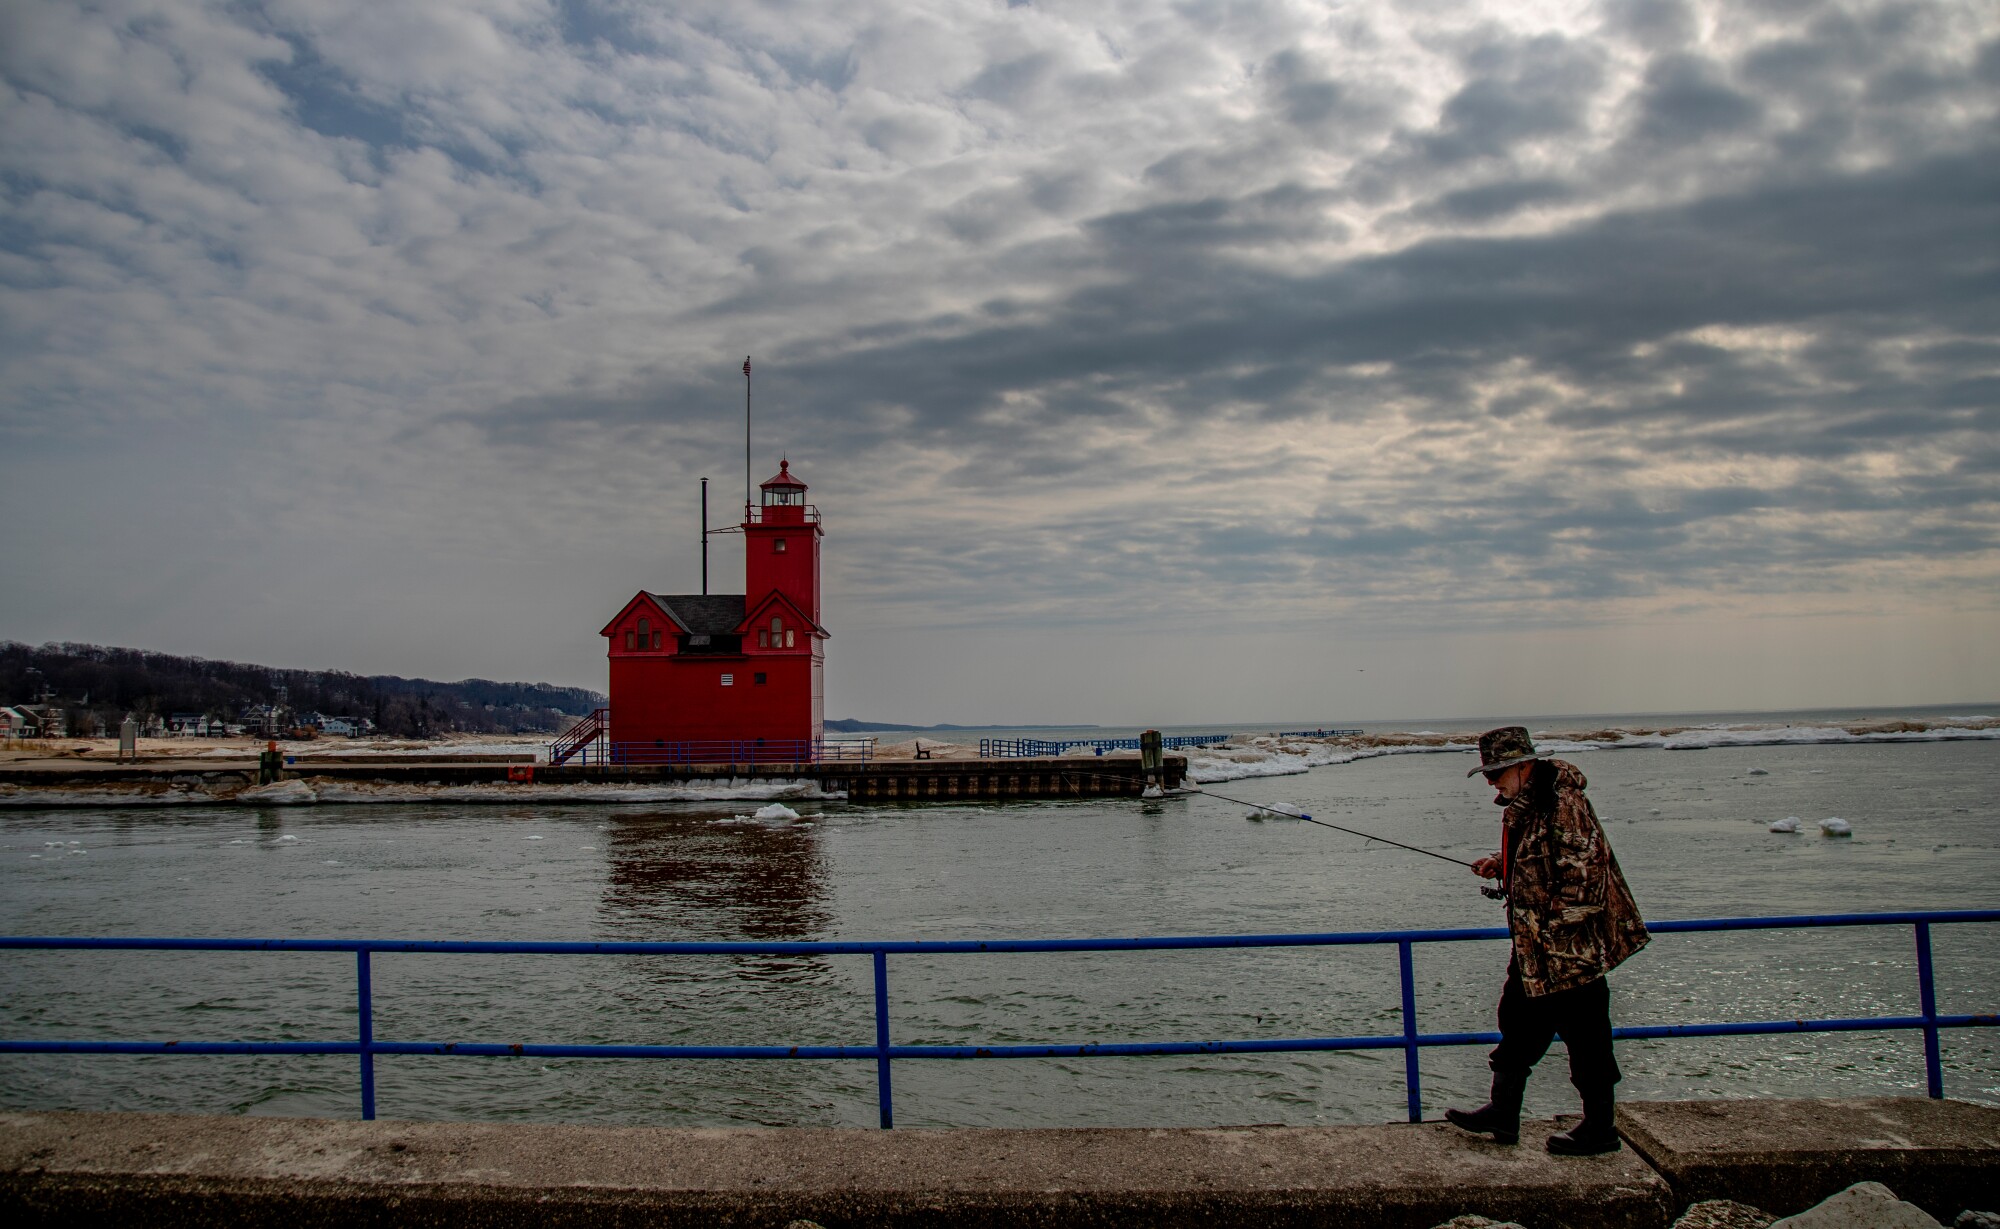 A man with a fishing pole walks along the waterfront near a red lighthouse